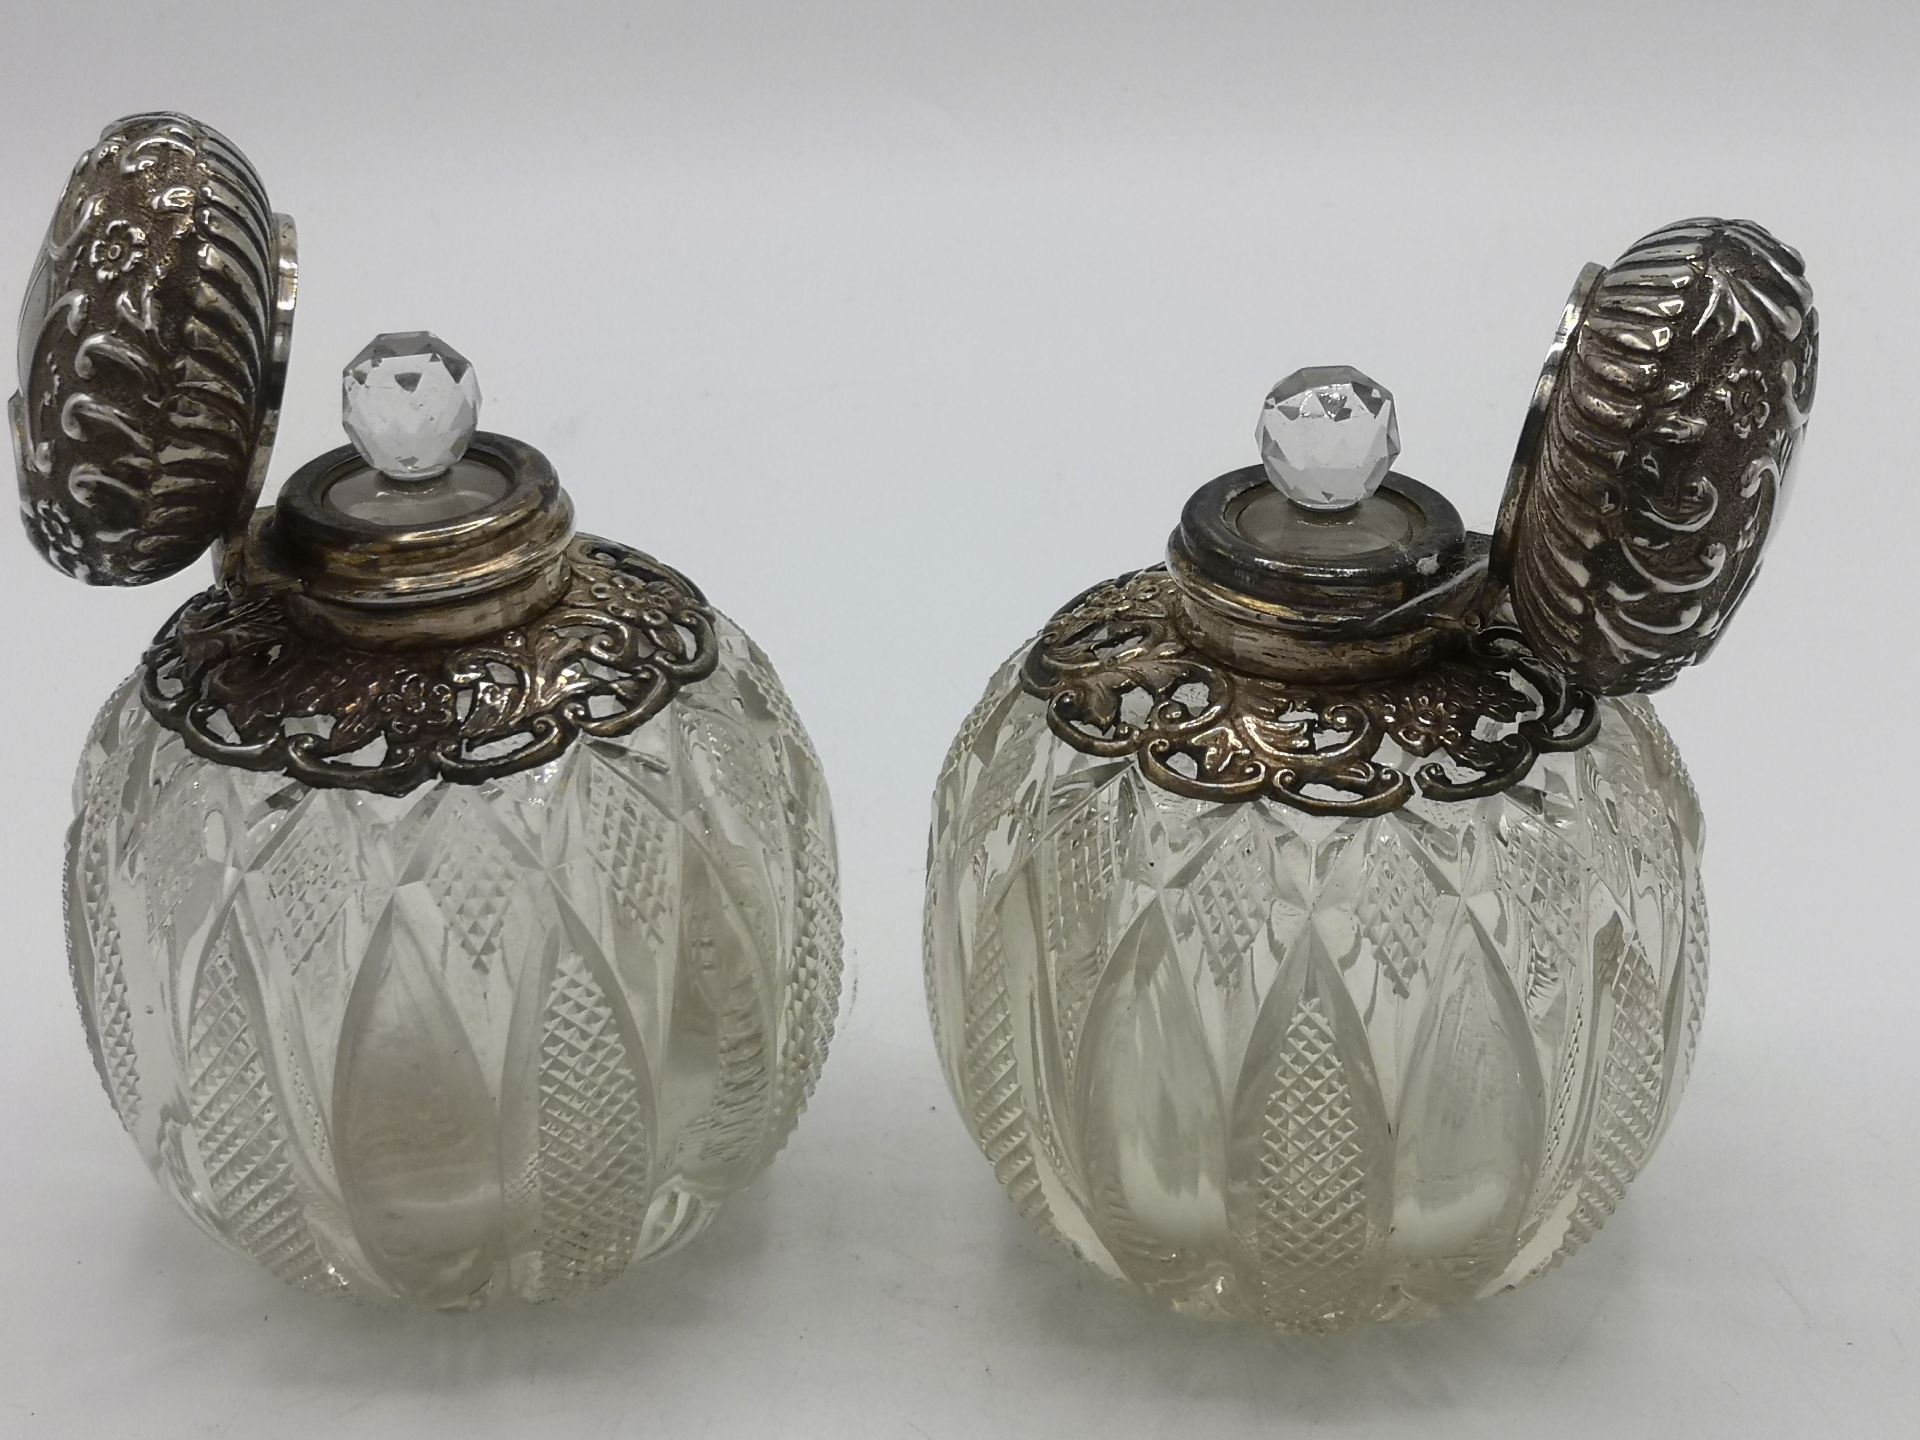 Two cut glass and silver perfume bottles - Image 3 of 5